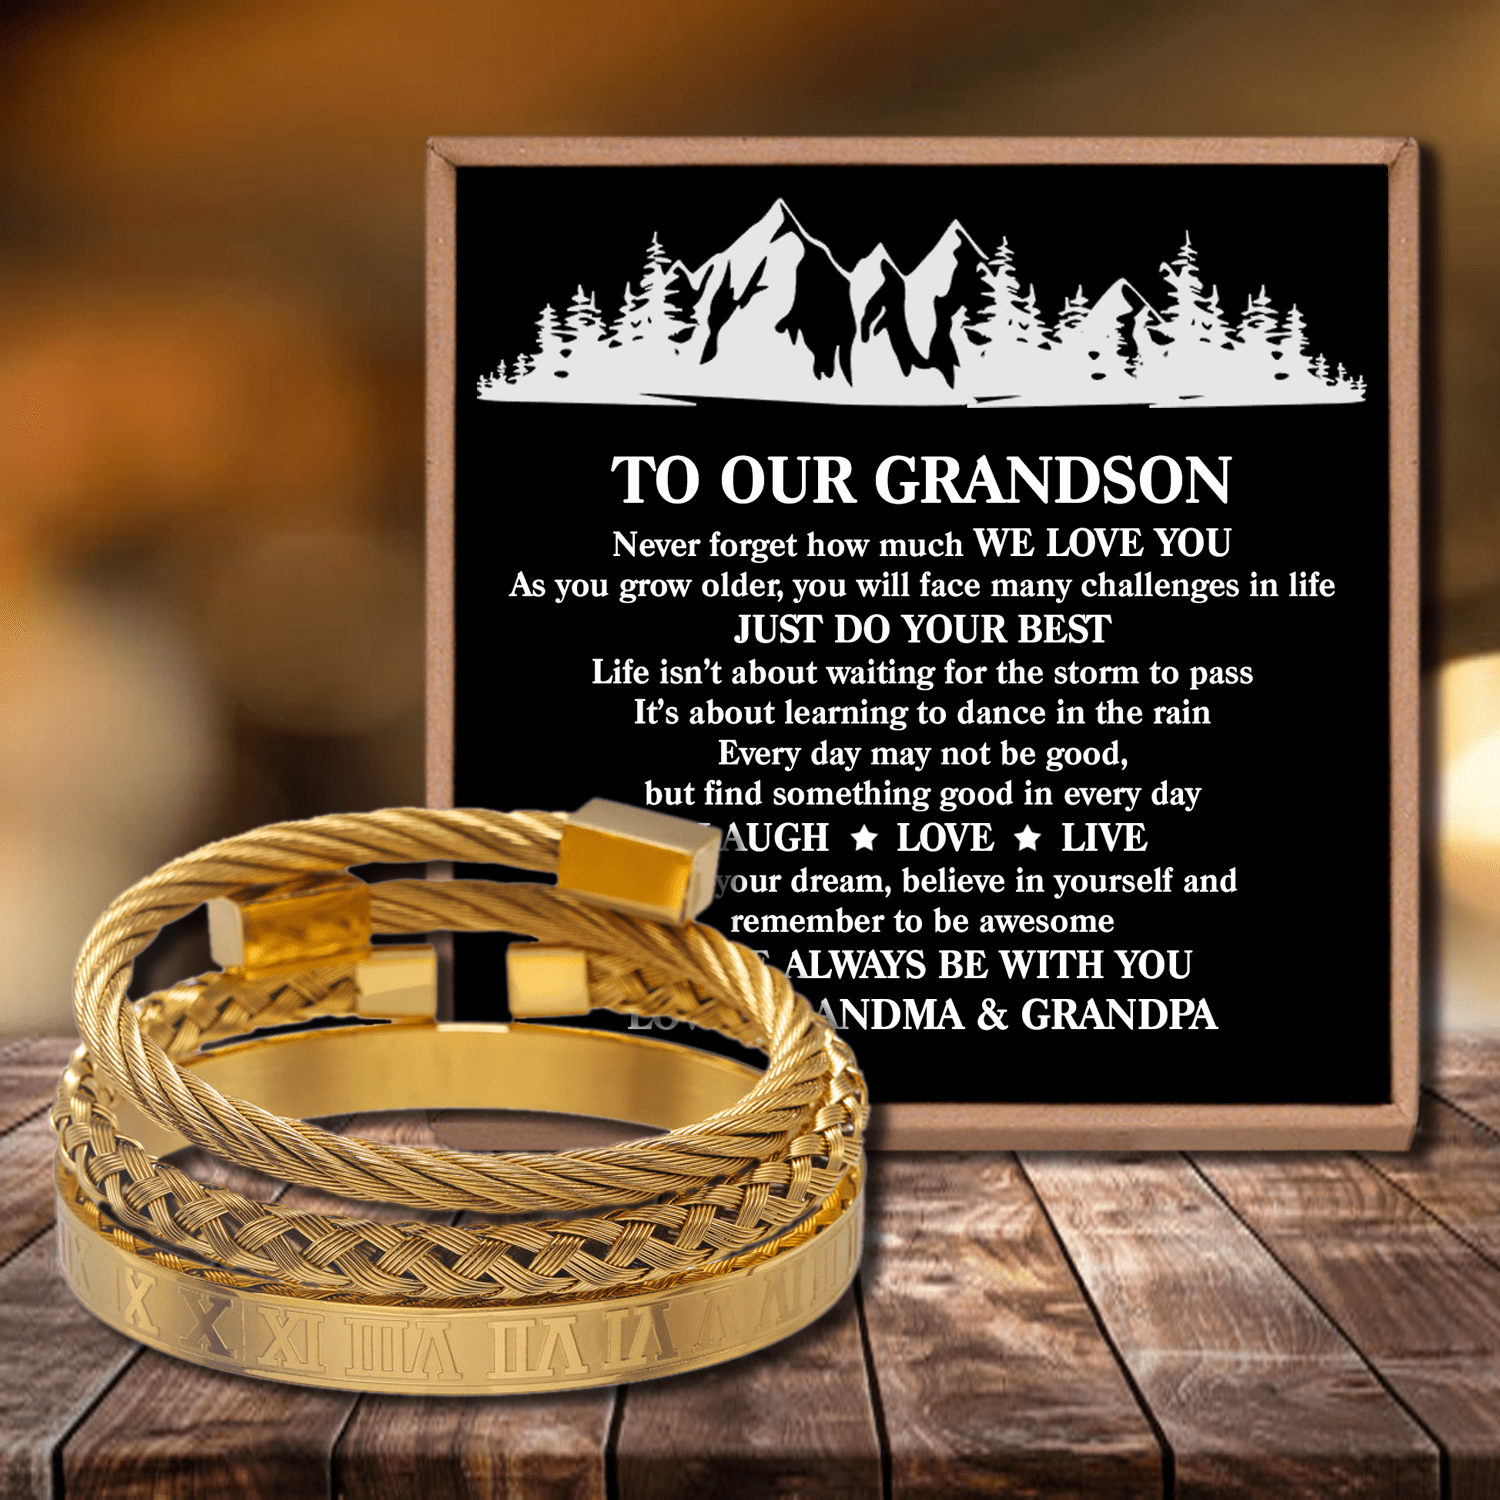 Bracelets To Our Grandson - Just Do Your Best Roman Numeral Bracelet Set Gold GiveMe-Gifts